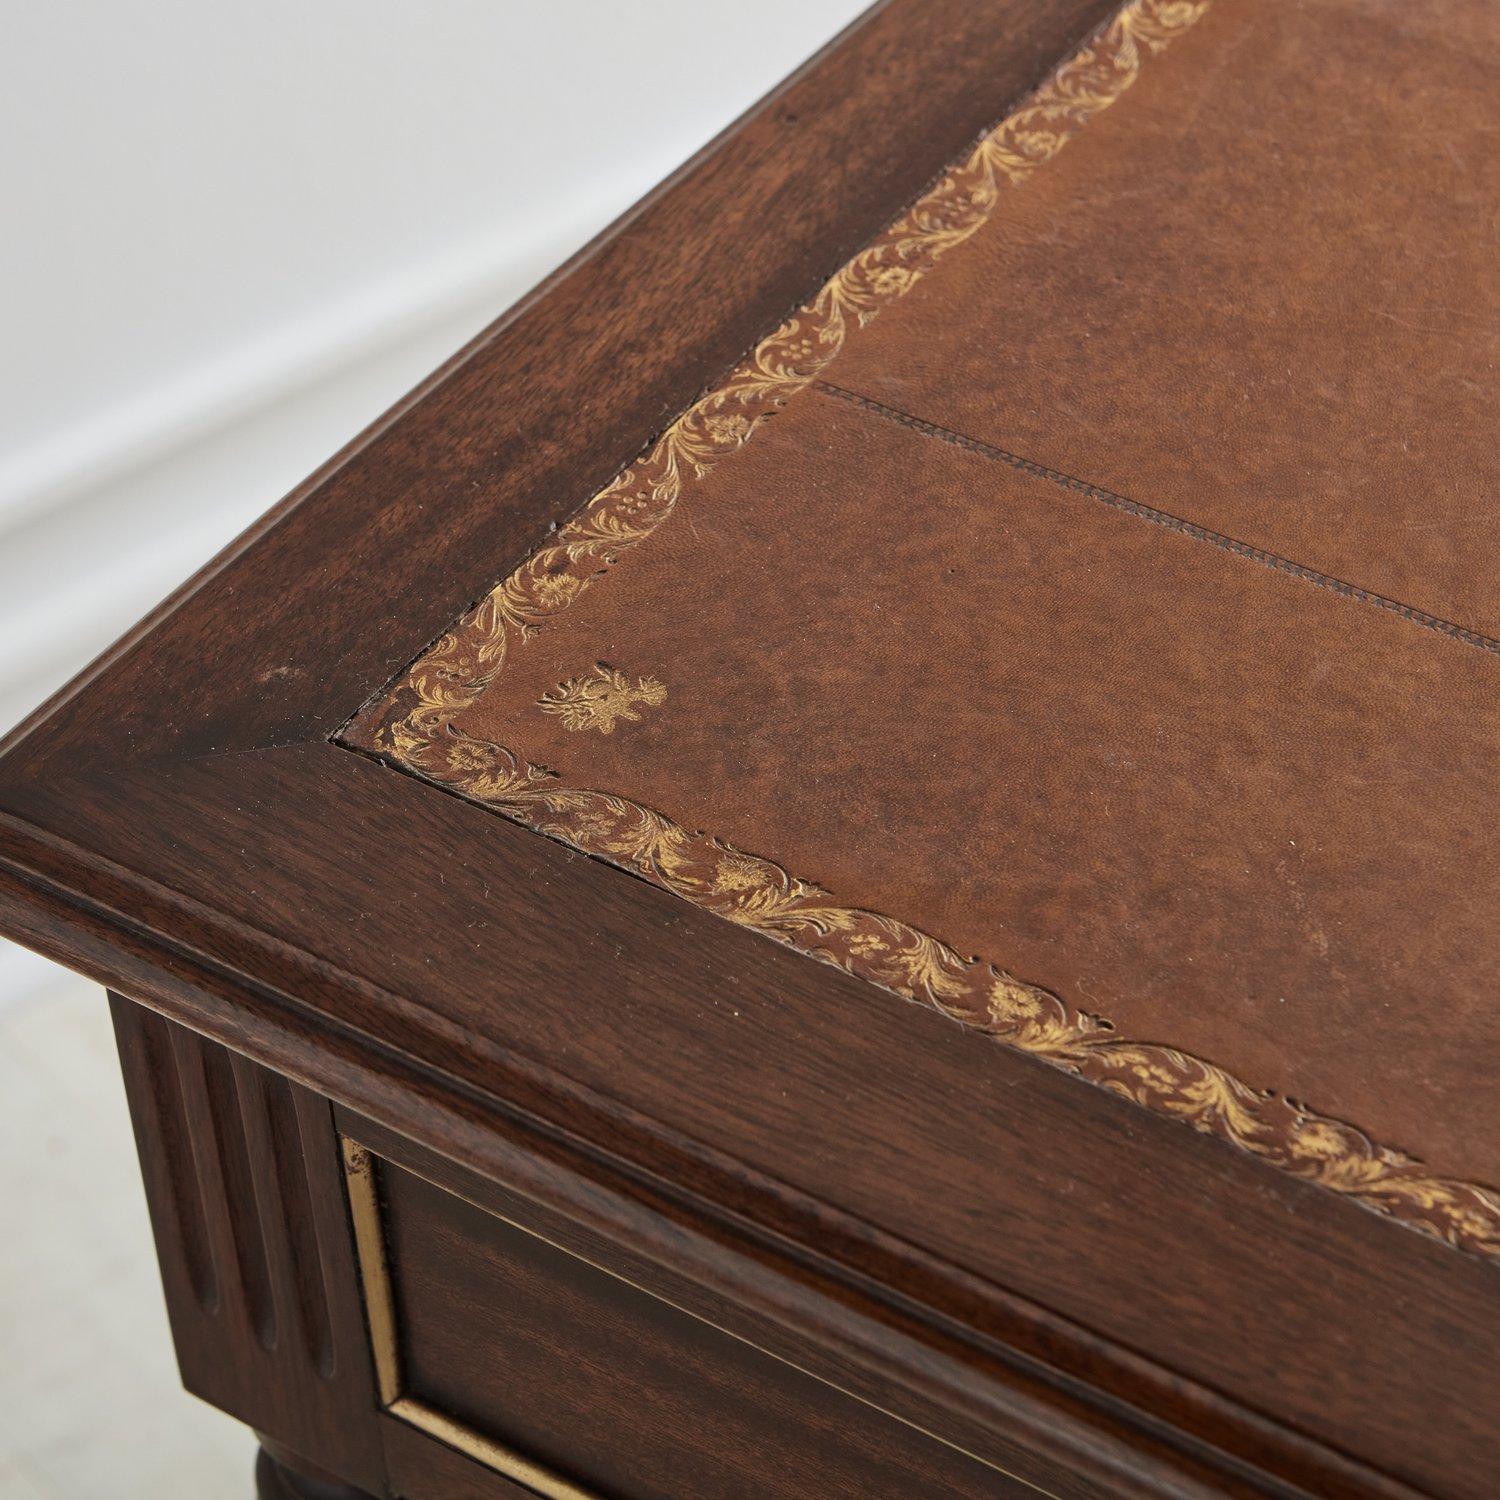 Mahogany Desk With Inlaid Leather Top and Gold Leaf Details, Early 20th Century 6